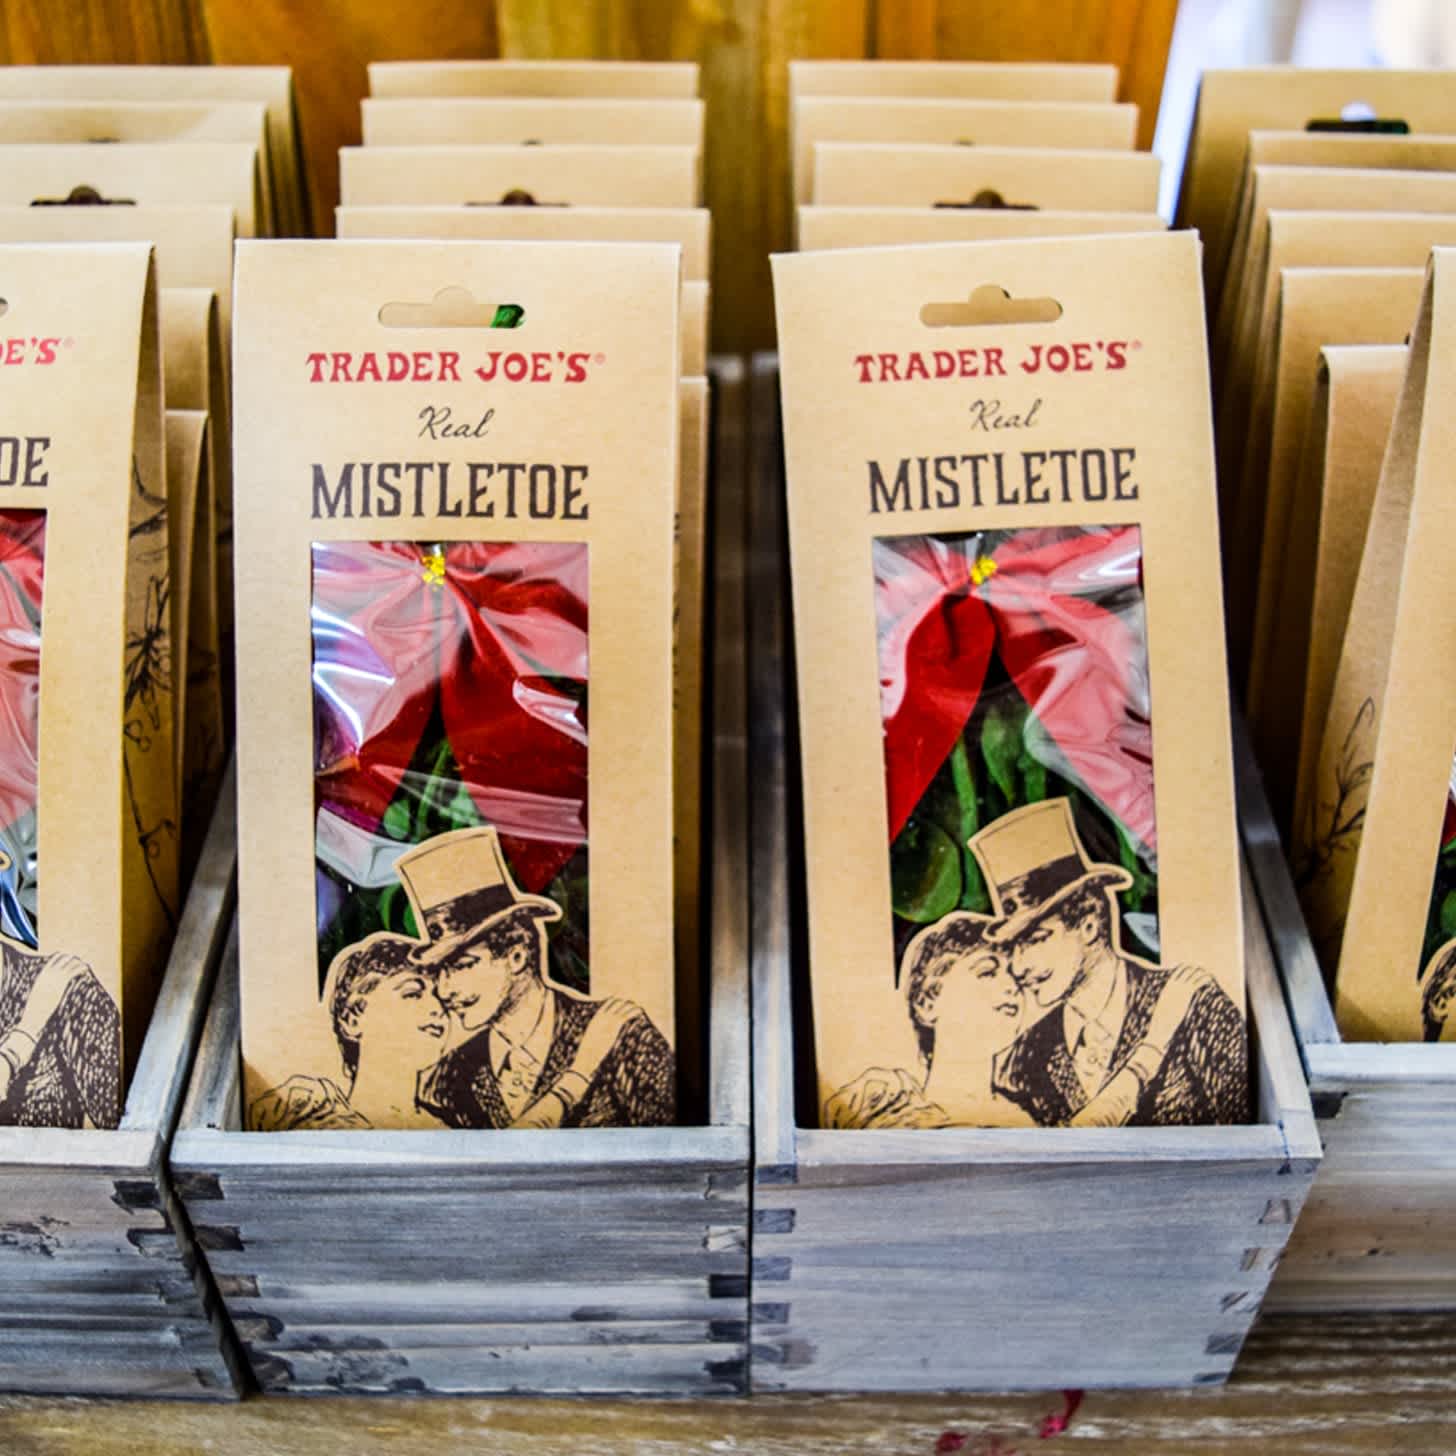 74 Holiday Products From Trader Joe's That Are Perfect For Gift Giving